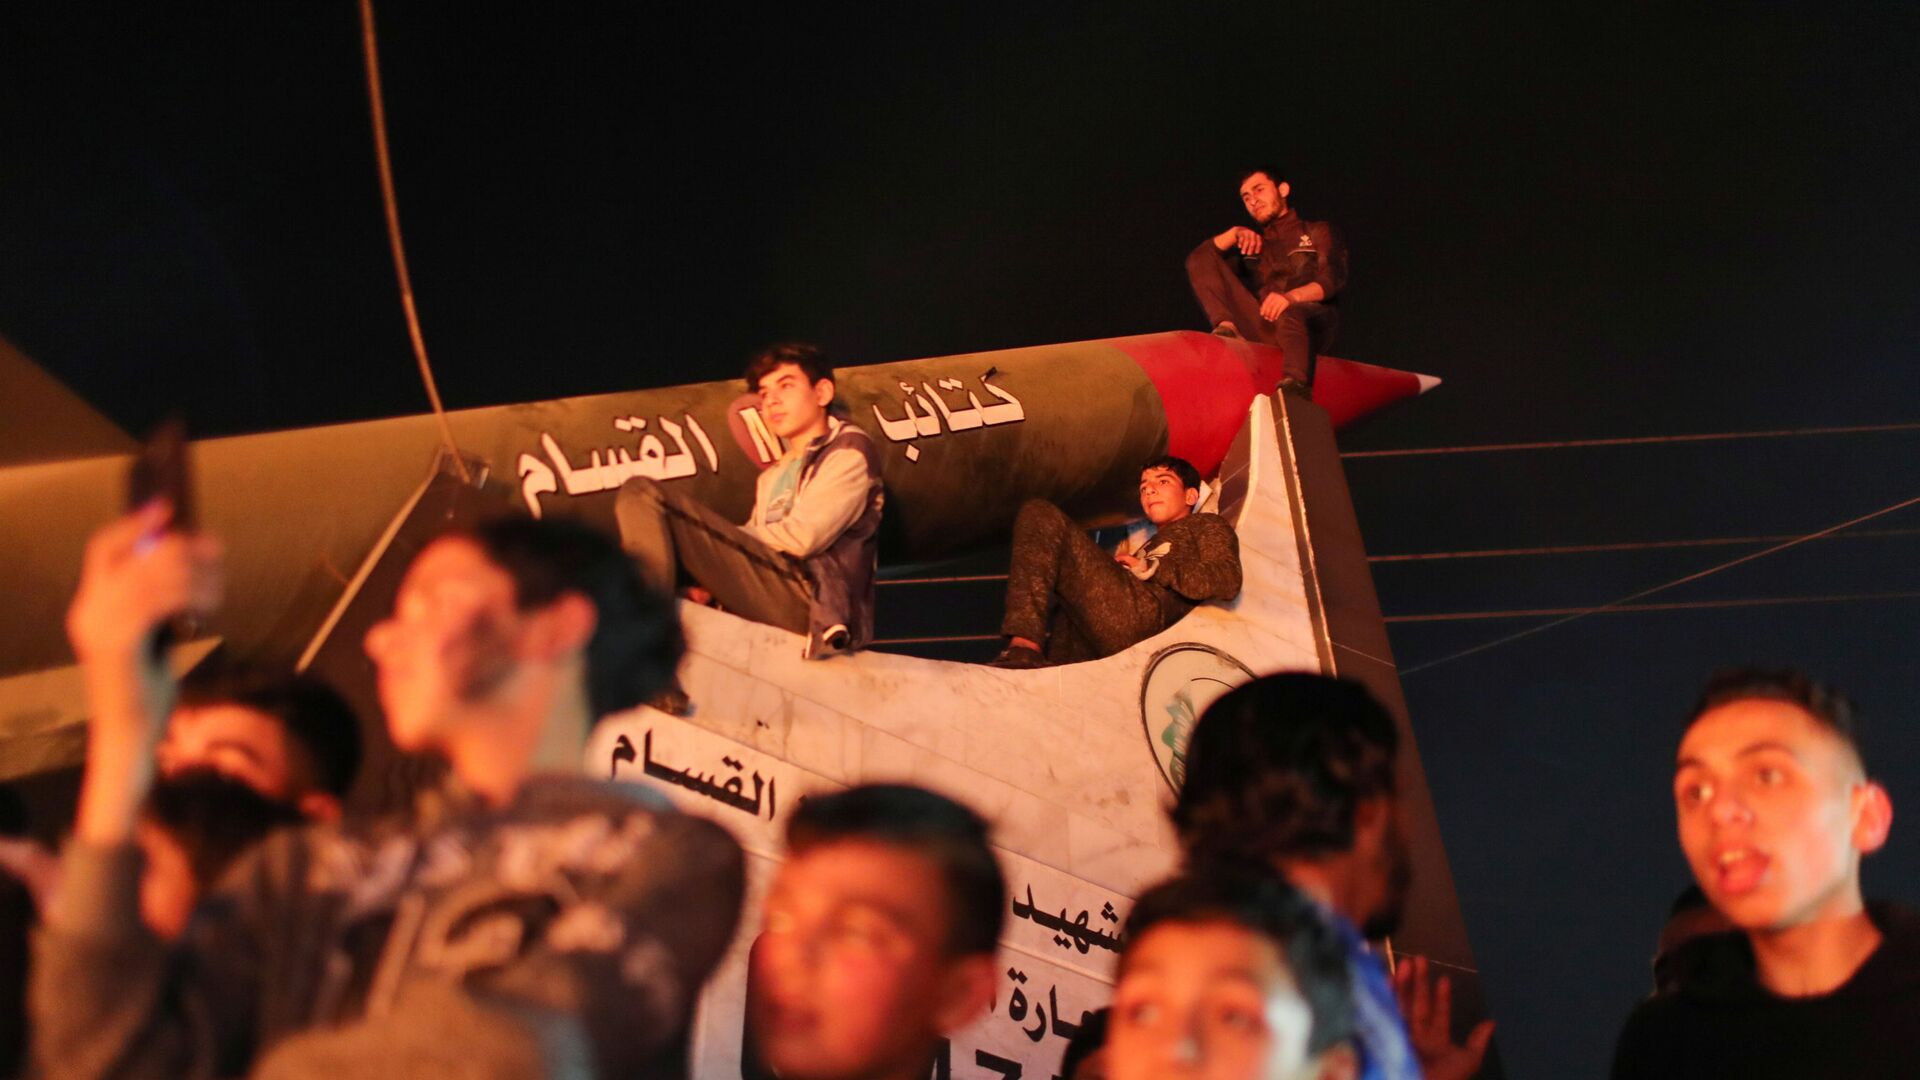 Palestinian demonstrators sit atop a monument of a Hamas rocket during an anti-Israel protest over tension in Jerusalem, in Gaza City April 24, 2021 - Sputnik International, 1920, 11.09.2021